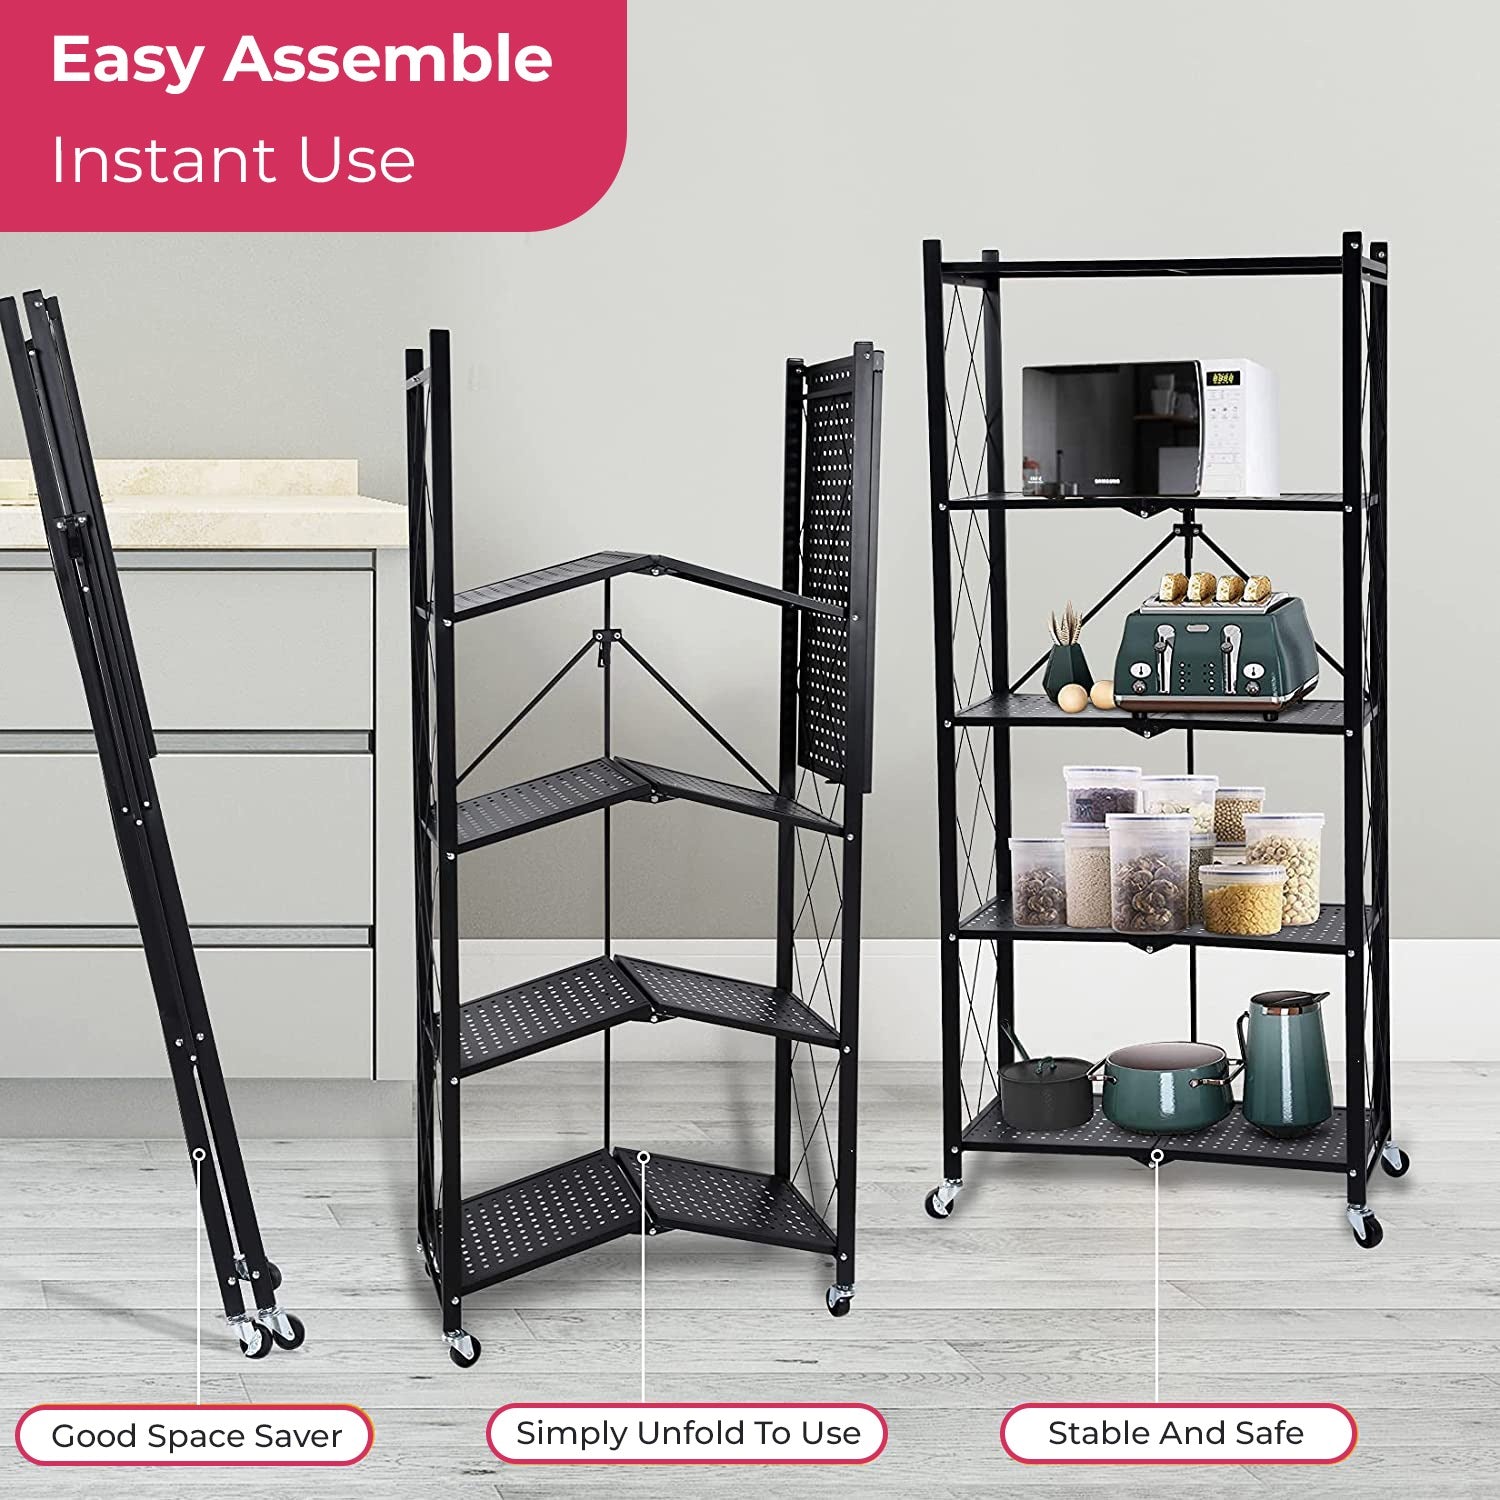 Multi-tier foldable storage rack with movable wheels, easy to assemble